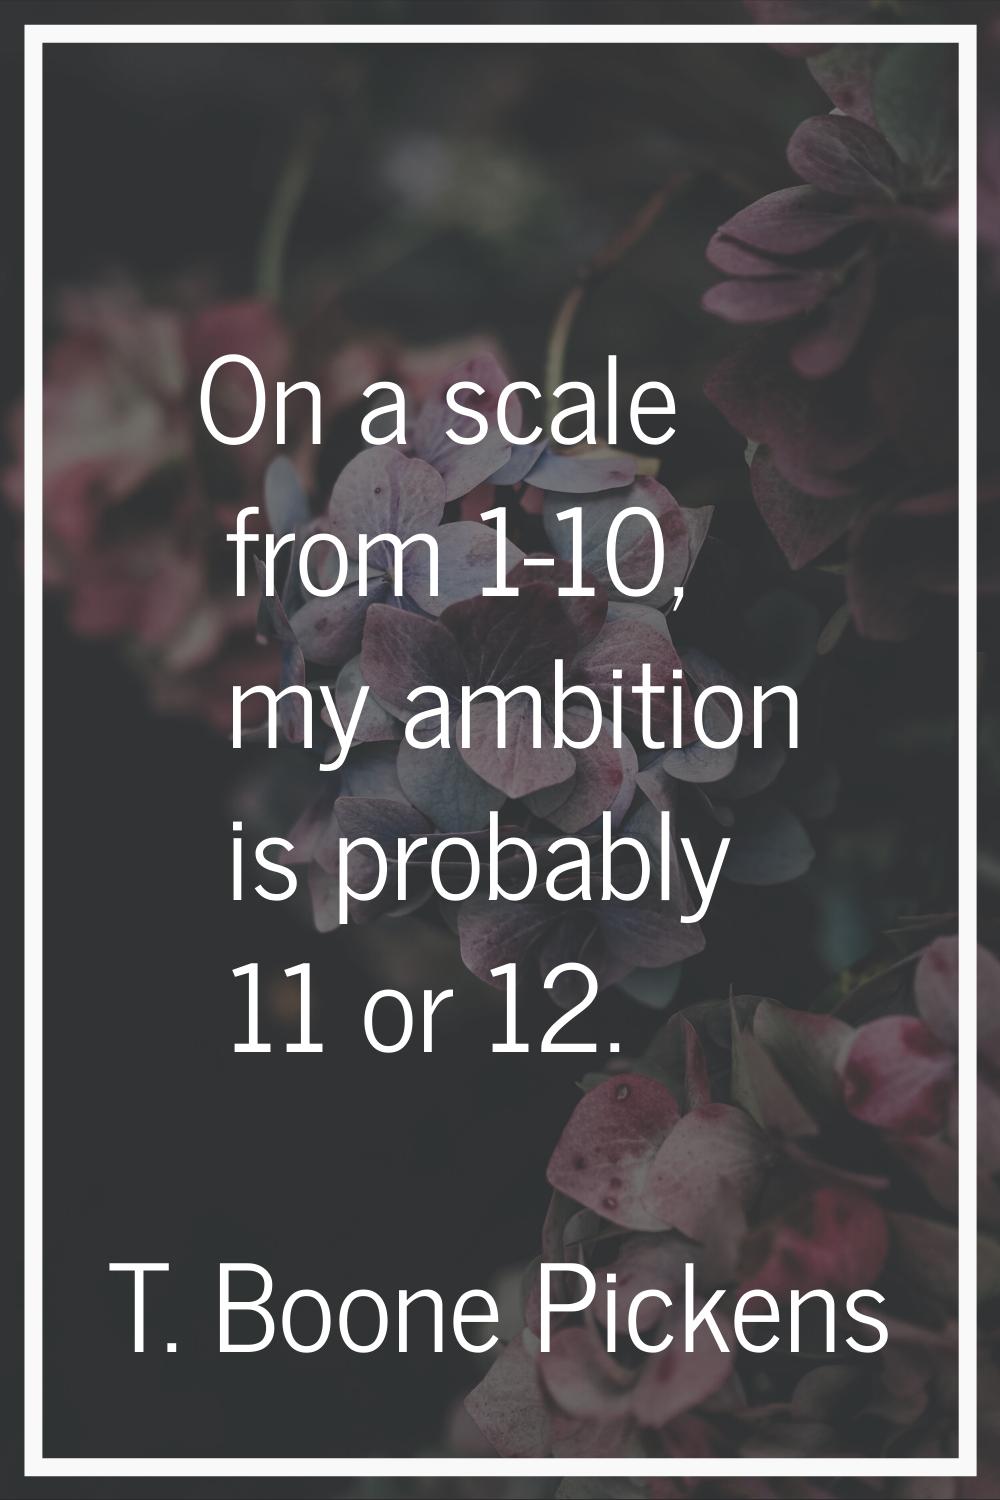 On a scale from 1-10, my ambition is probably 11 or 12.